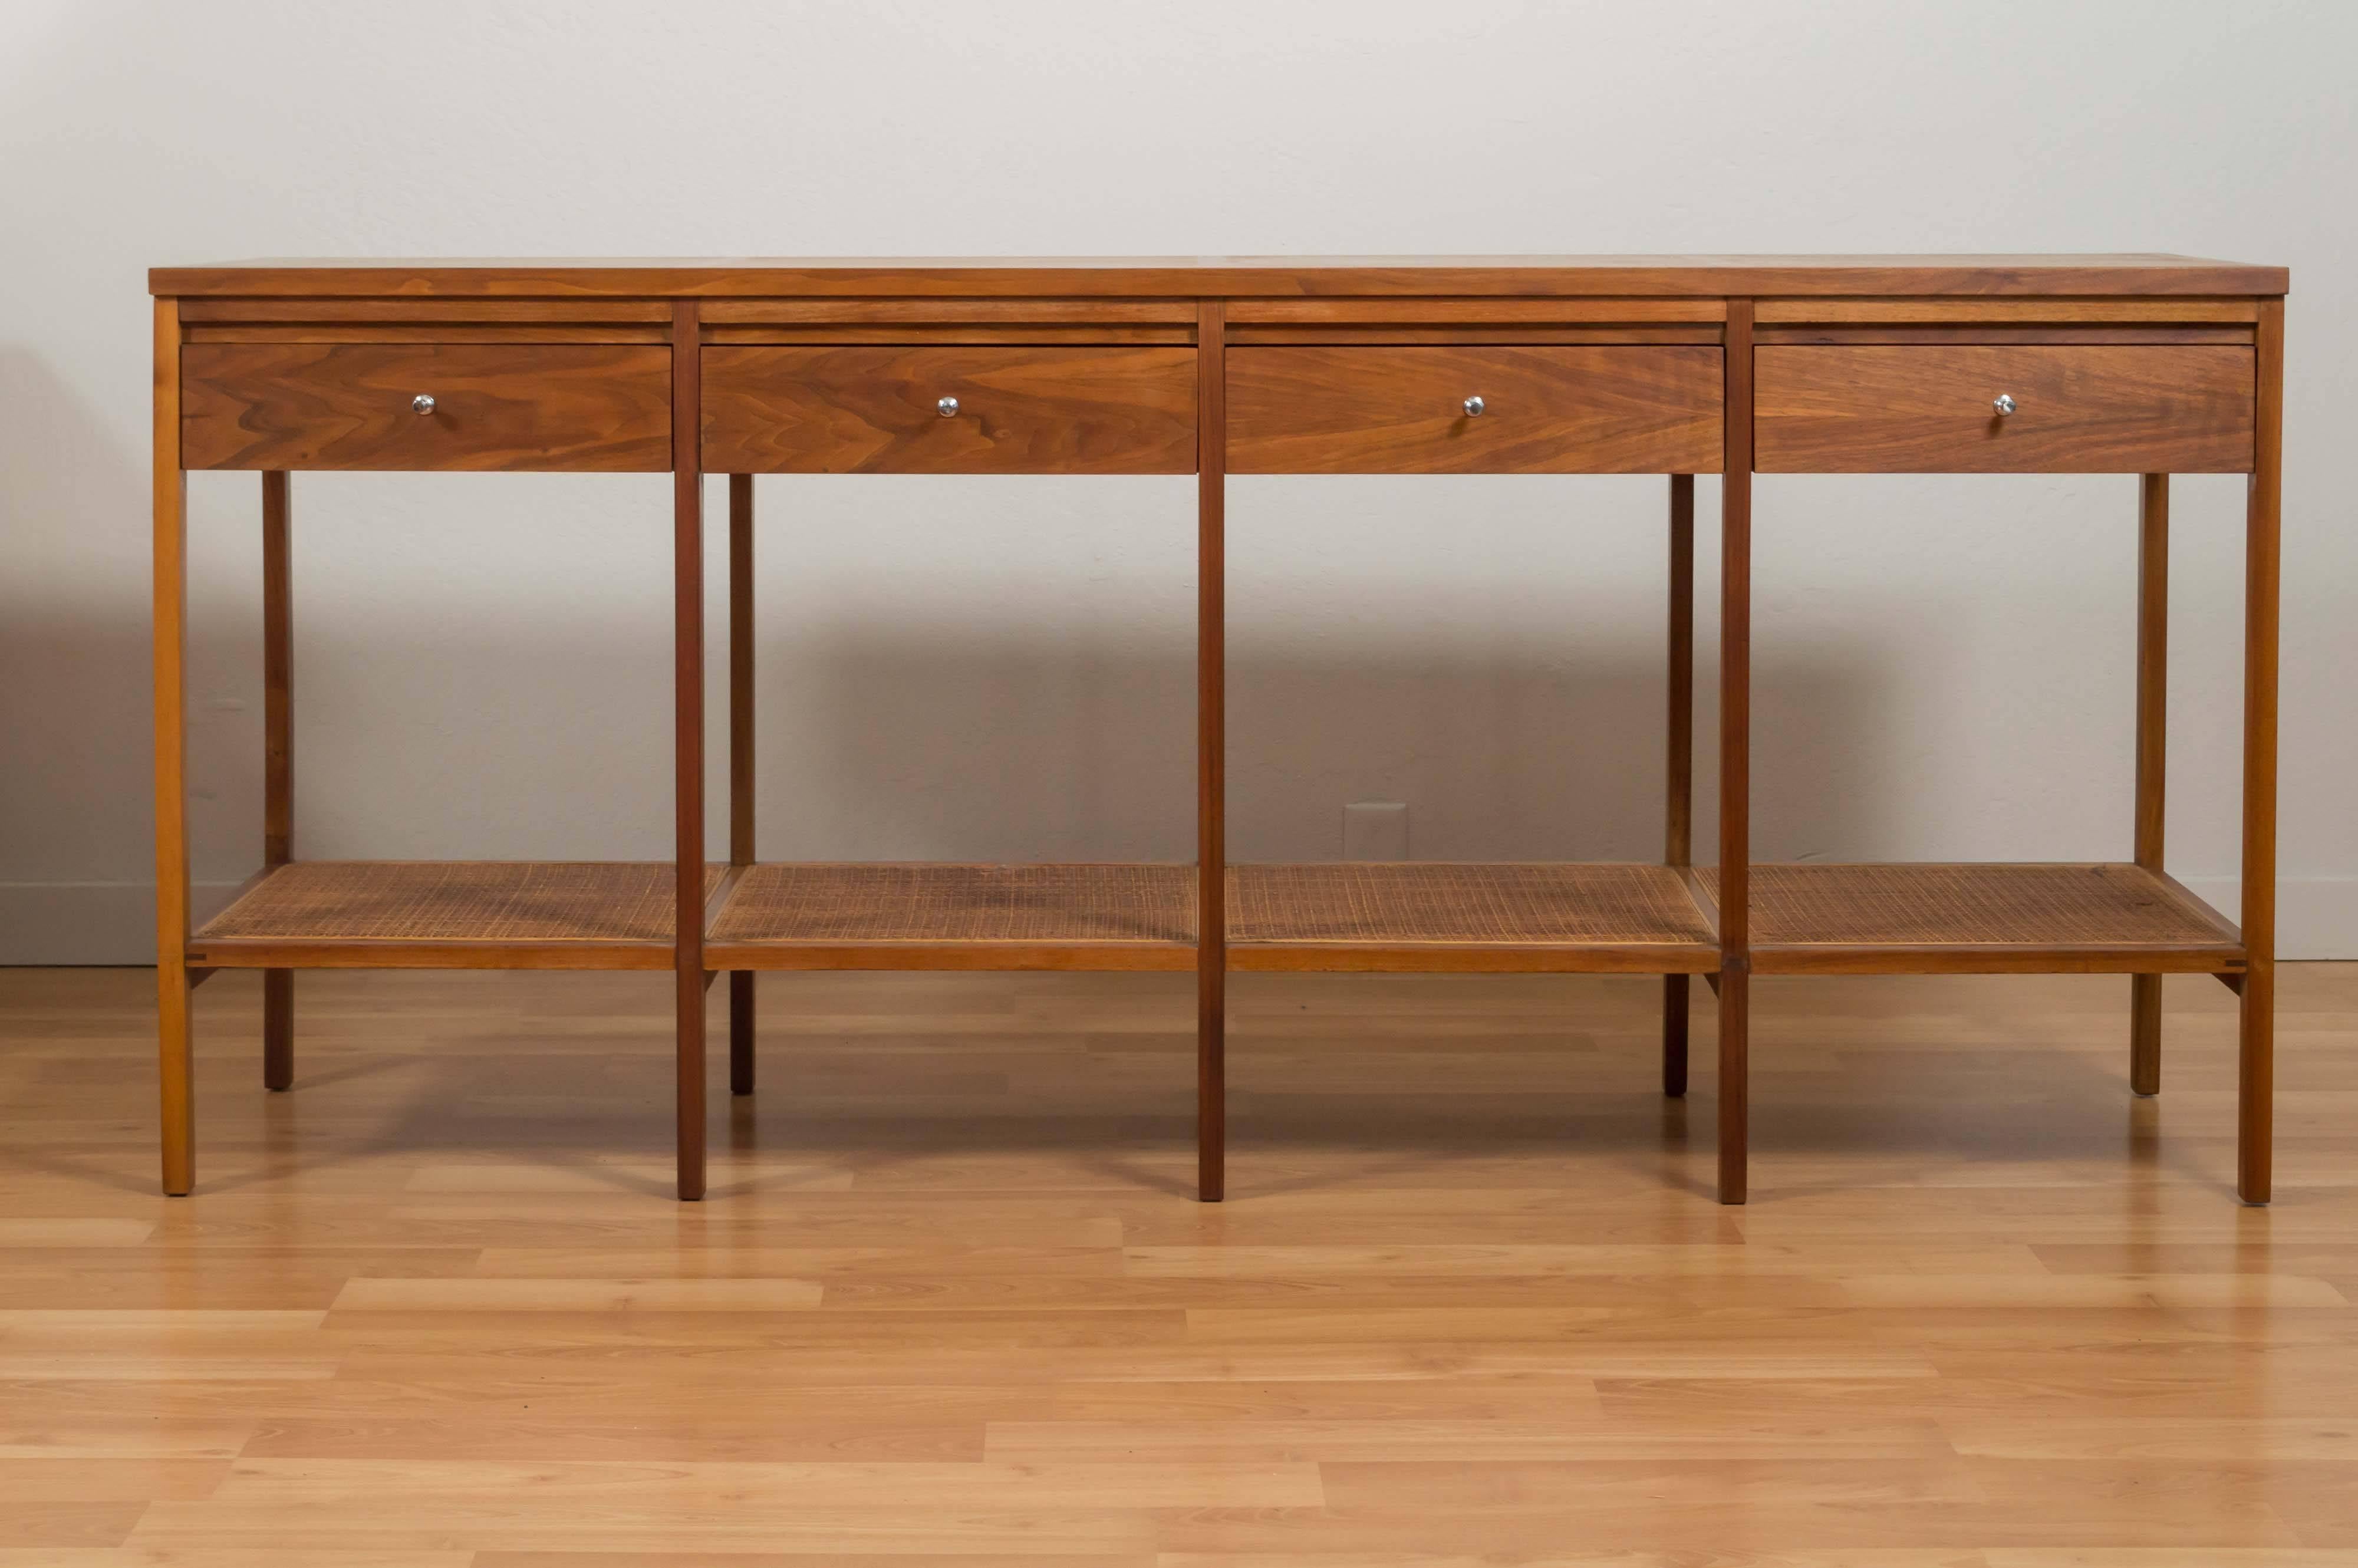 Handsome and rare four-drawer console or sofa table by Paul McCobb for Lane’s “Delineator” series. Wonderful looking four rosewood panels on top, then walnut frame and drawers, with original woven cane-covered shelf panels, and original polished